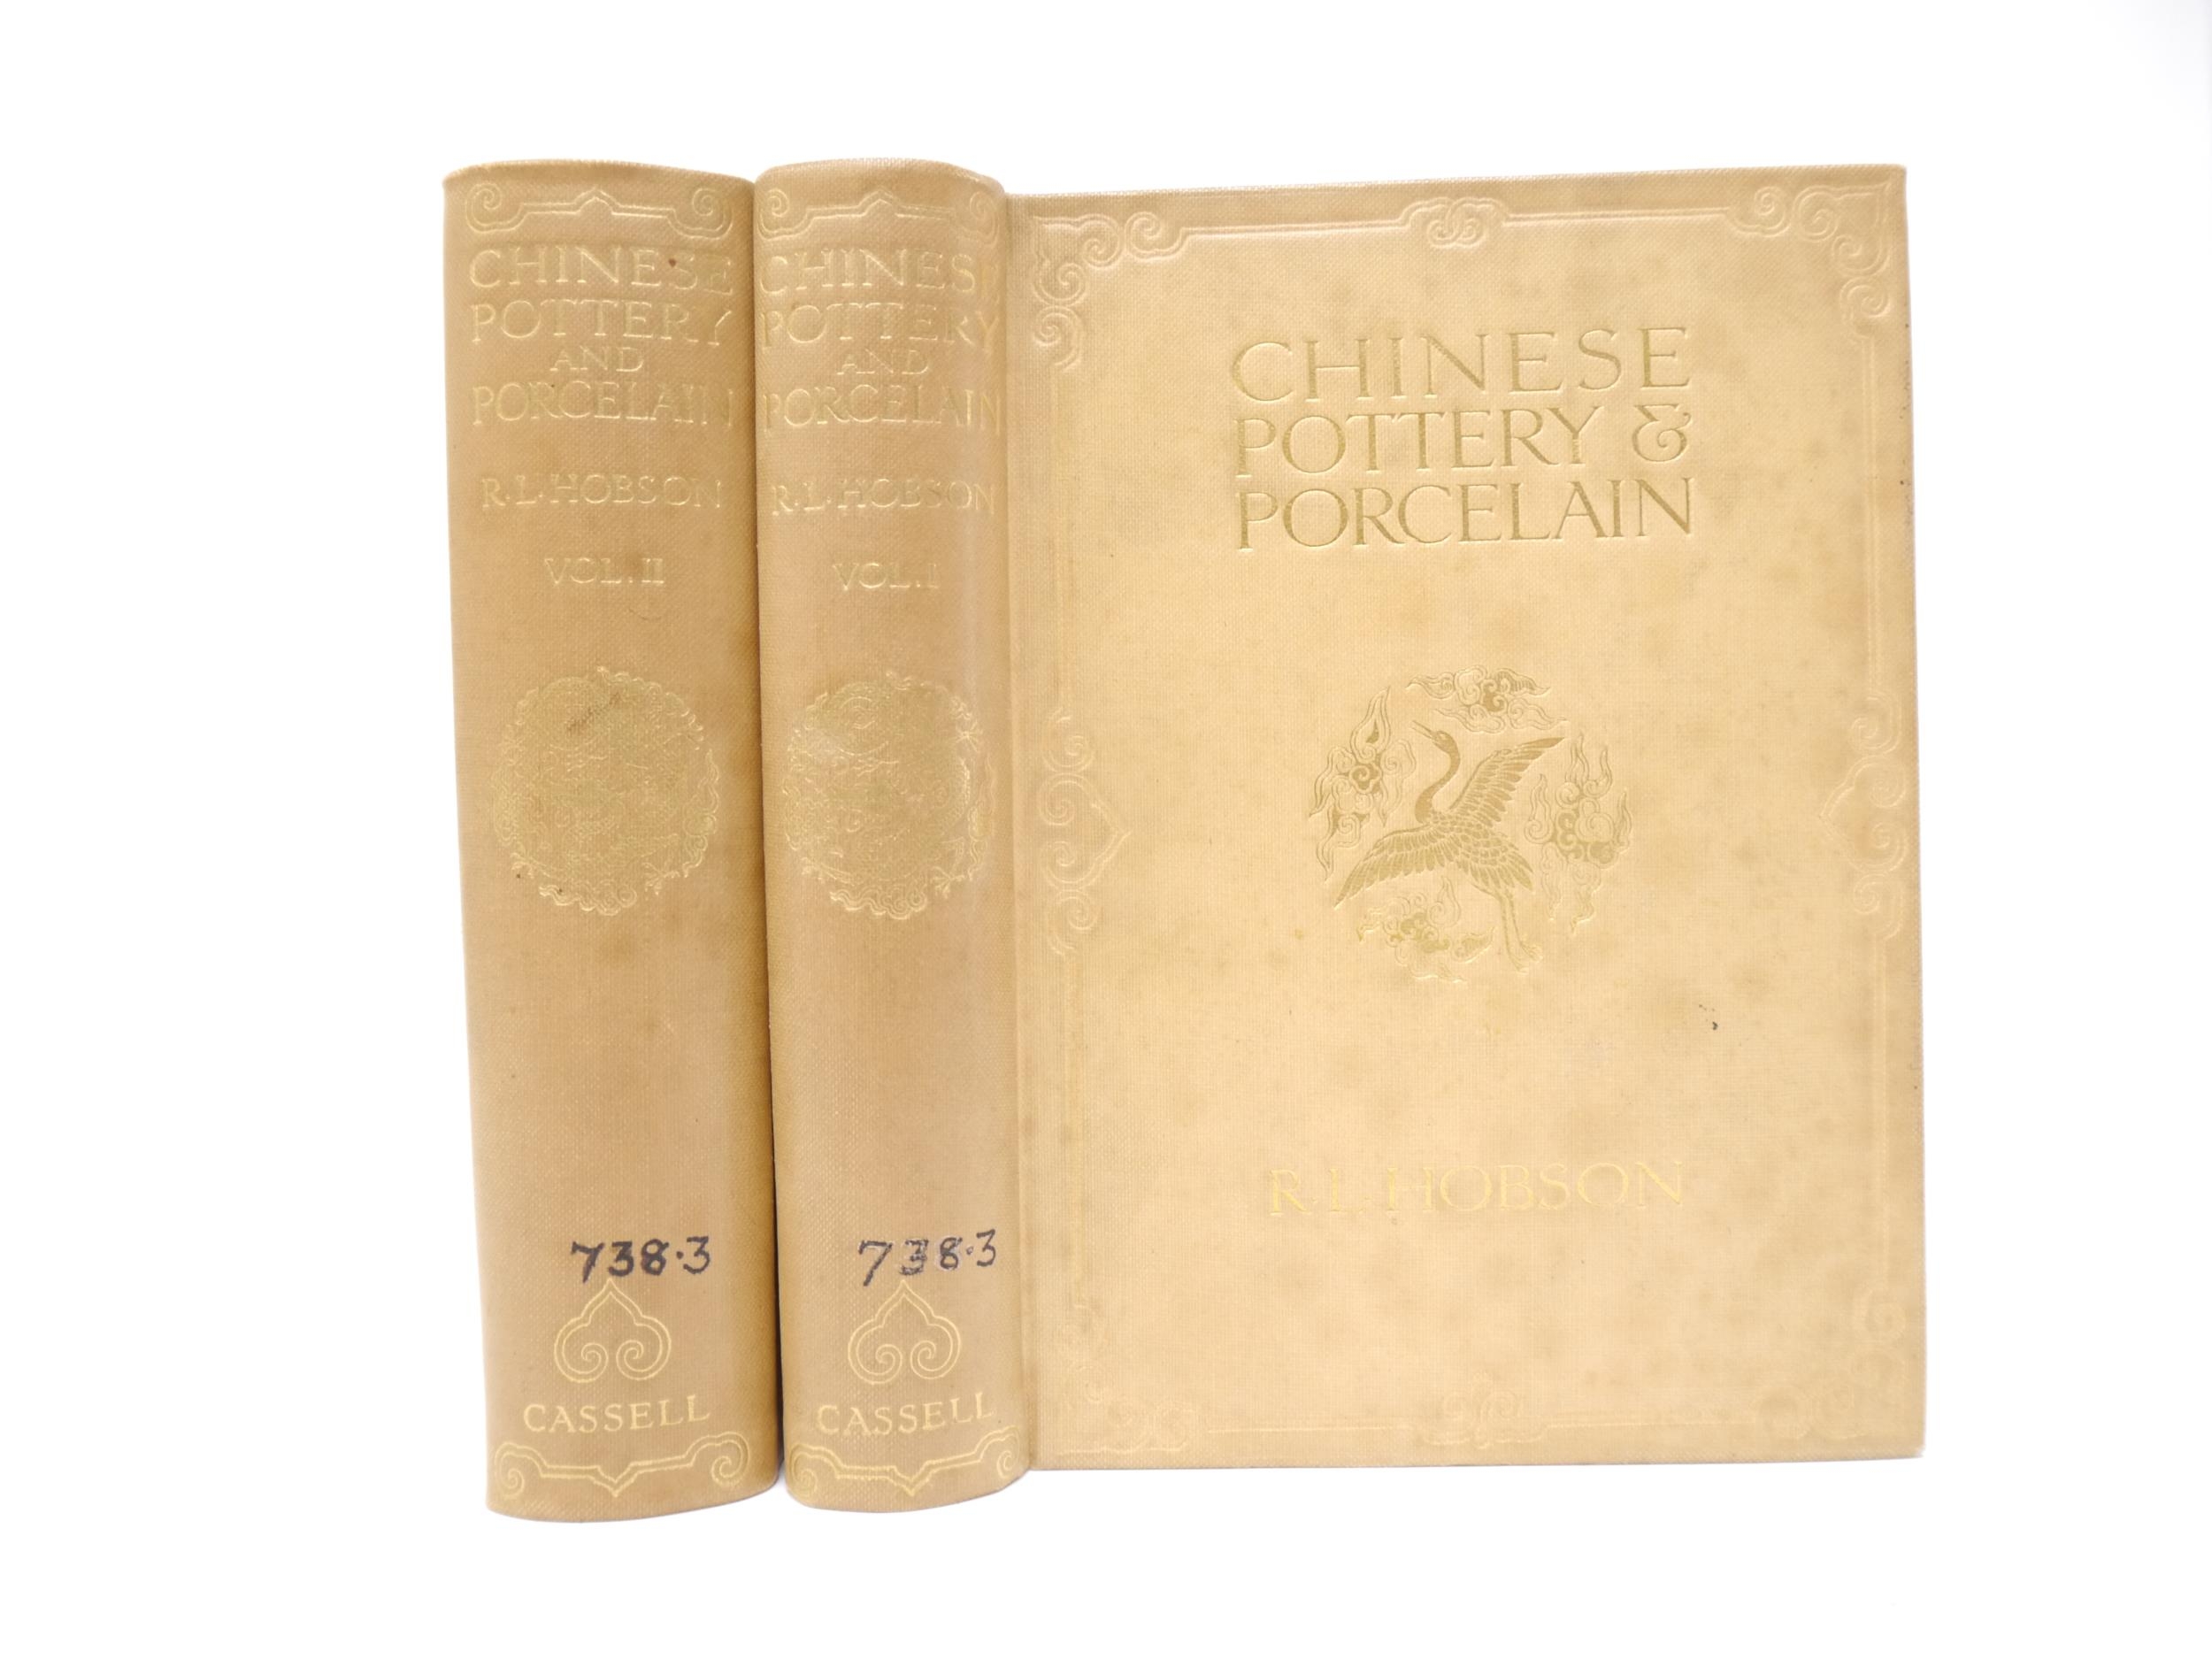 R.L. Hobson: 'Chinese Pottery and Porcelain: An Account of the Potter's Art in China, from Primitive